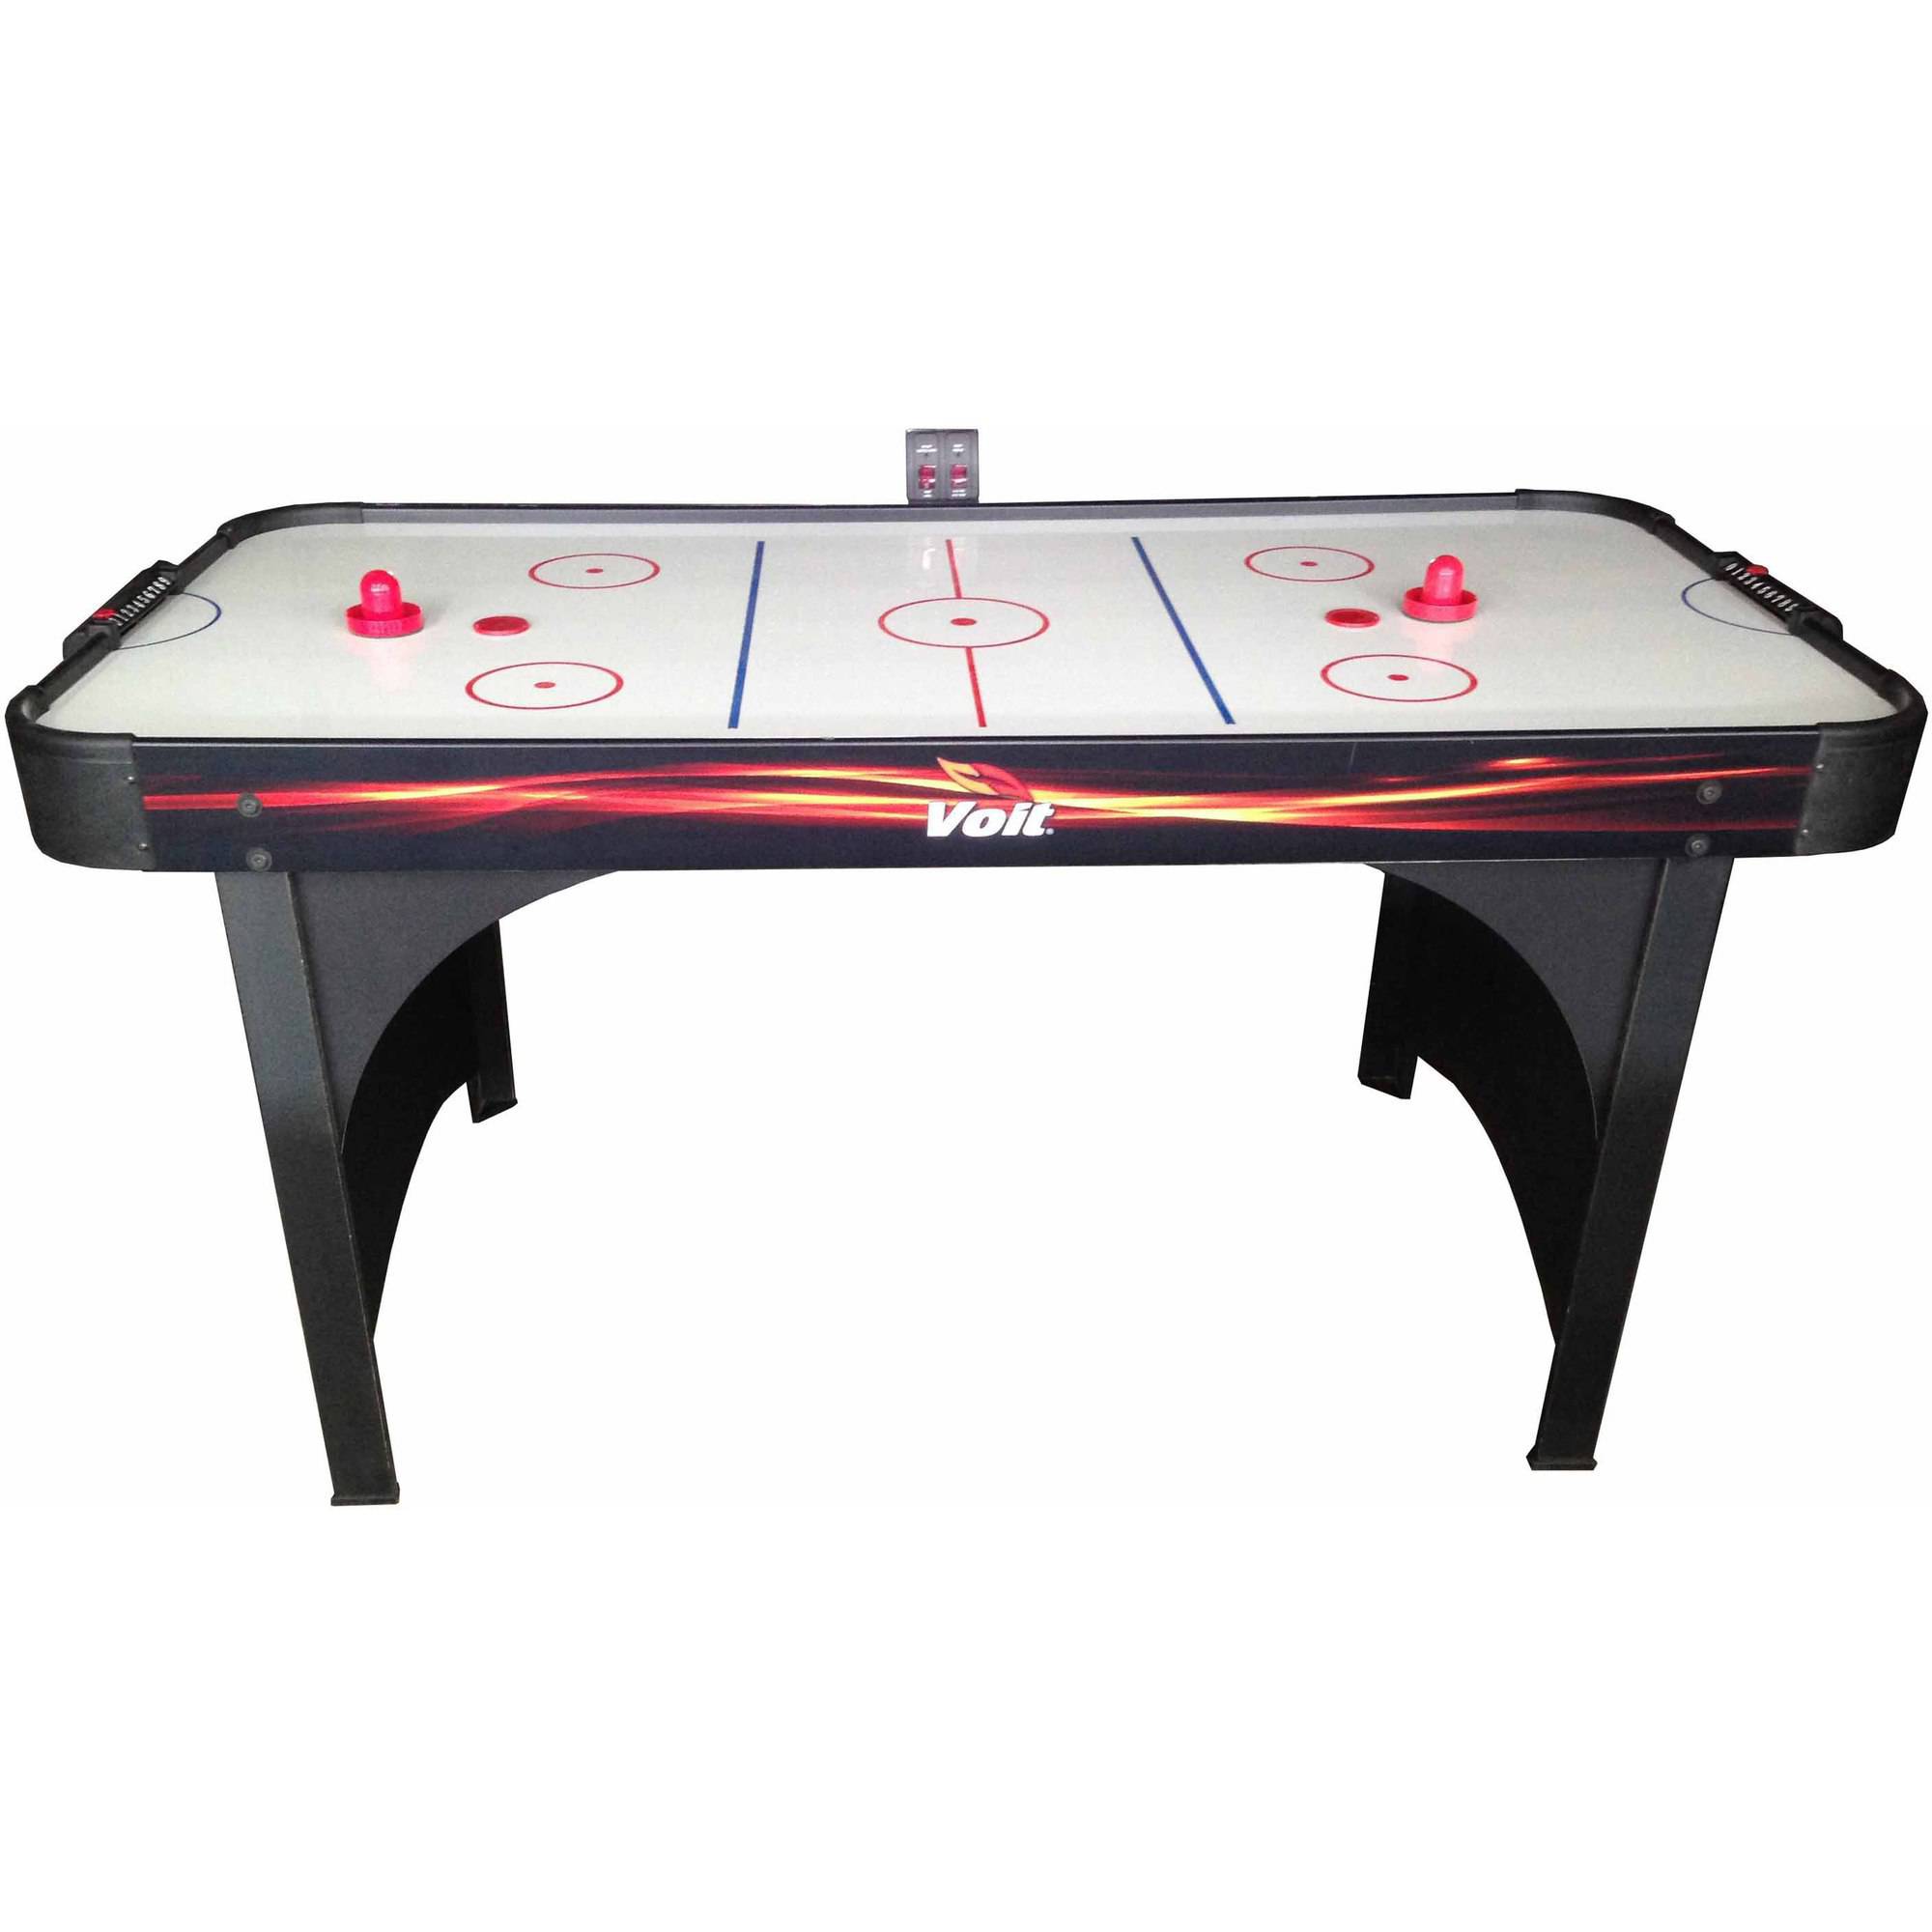 Voit Playmaker 60" Air Hockey Table with Table Tennis - image 2 of 6